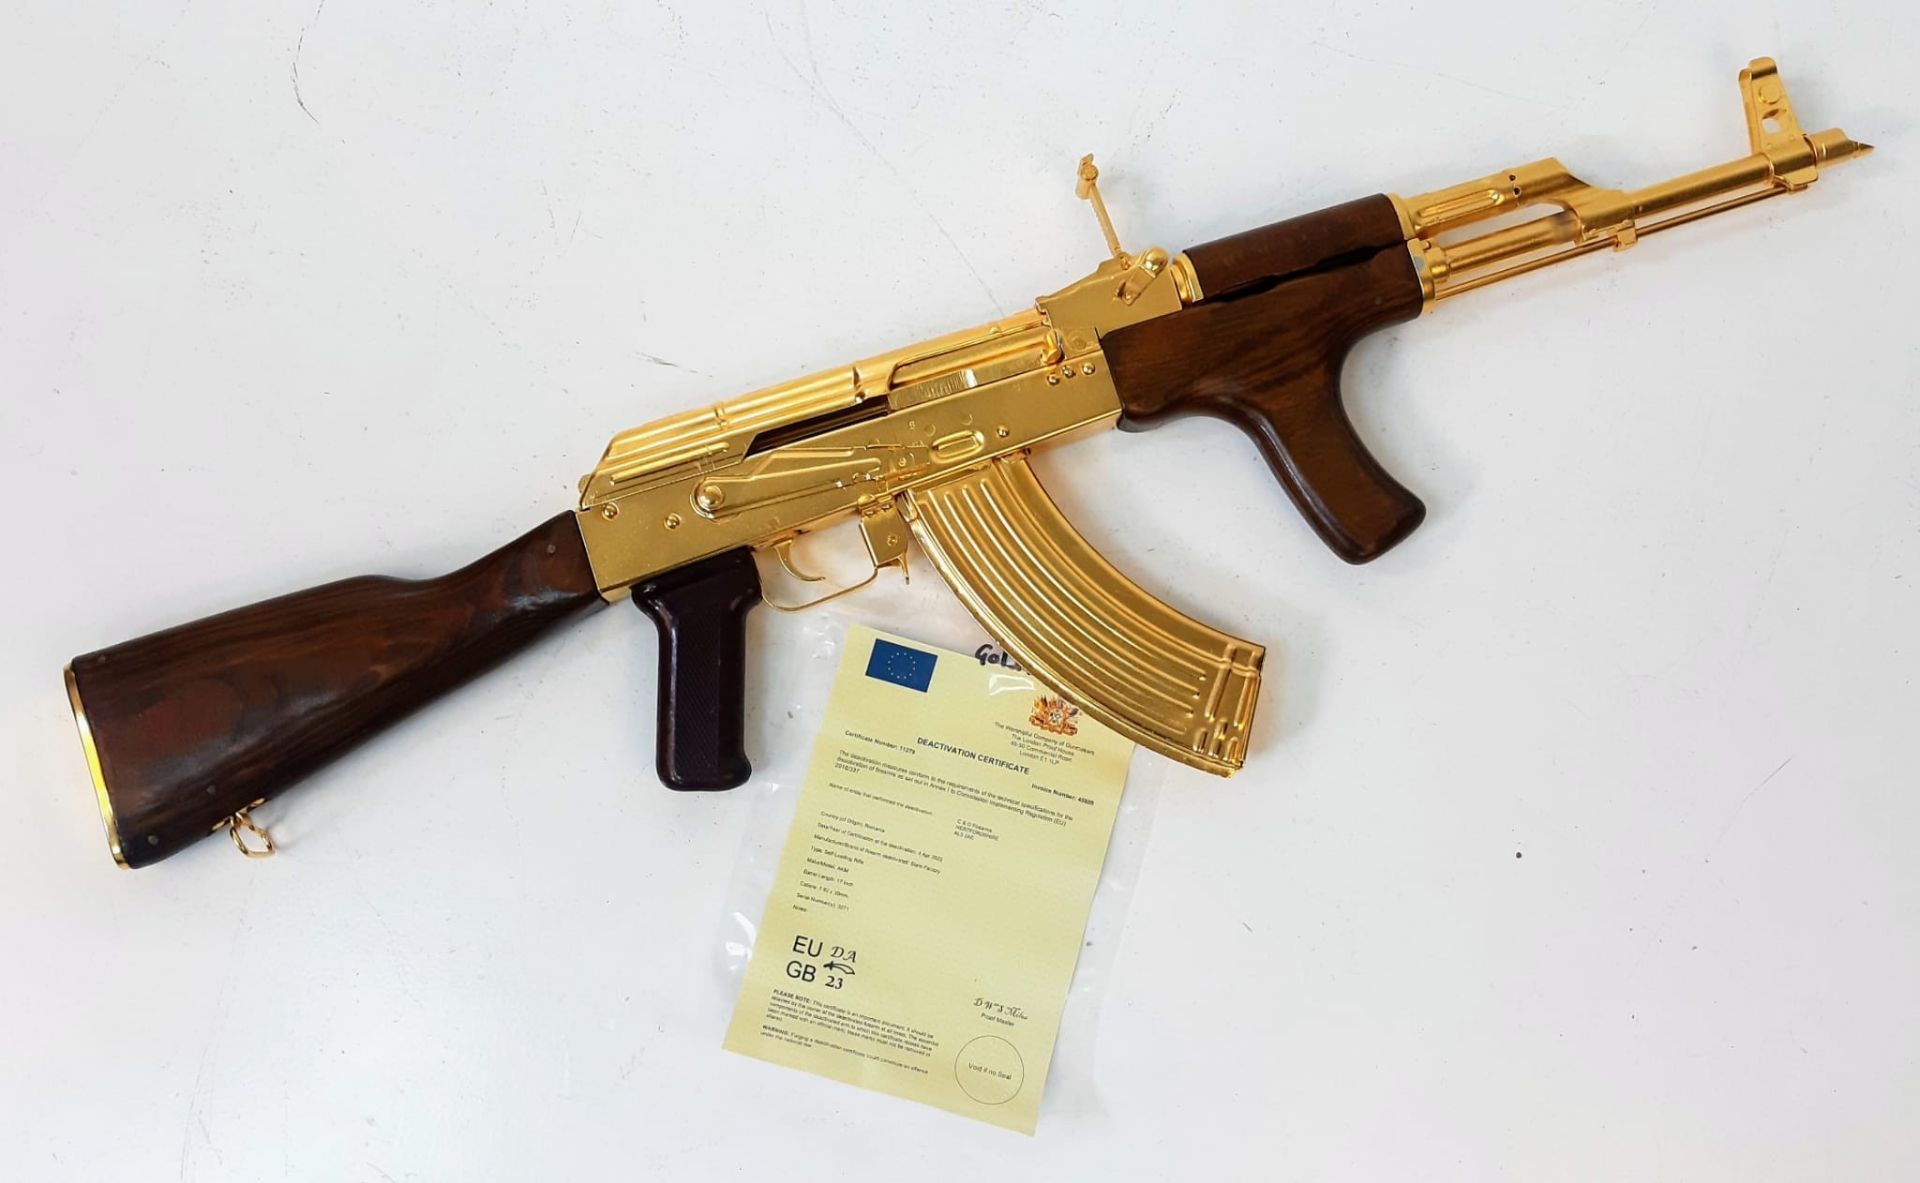 Ultimate Lord of War AK47 Deactivated Gold-Plated Rifle! The weapon that never gives up, finished in - Bild 3 aus 24